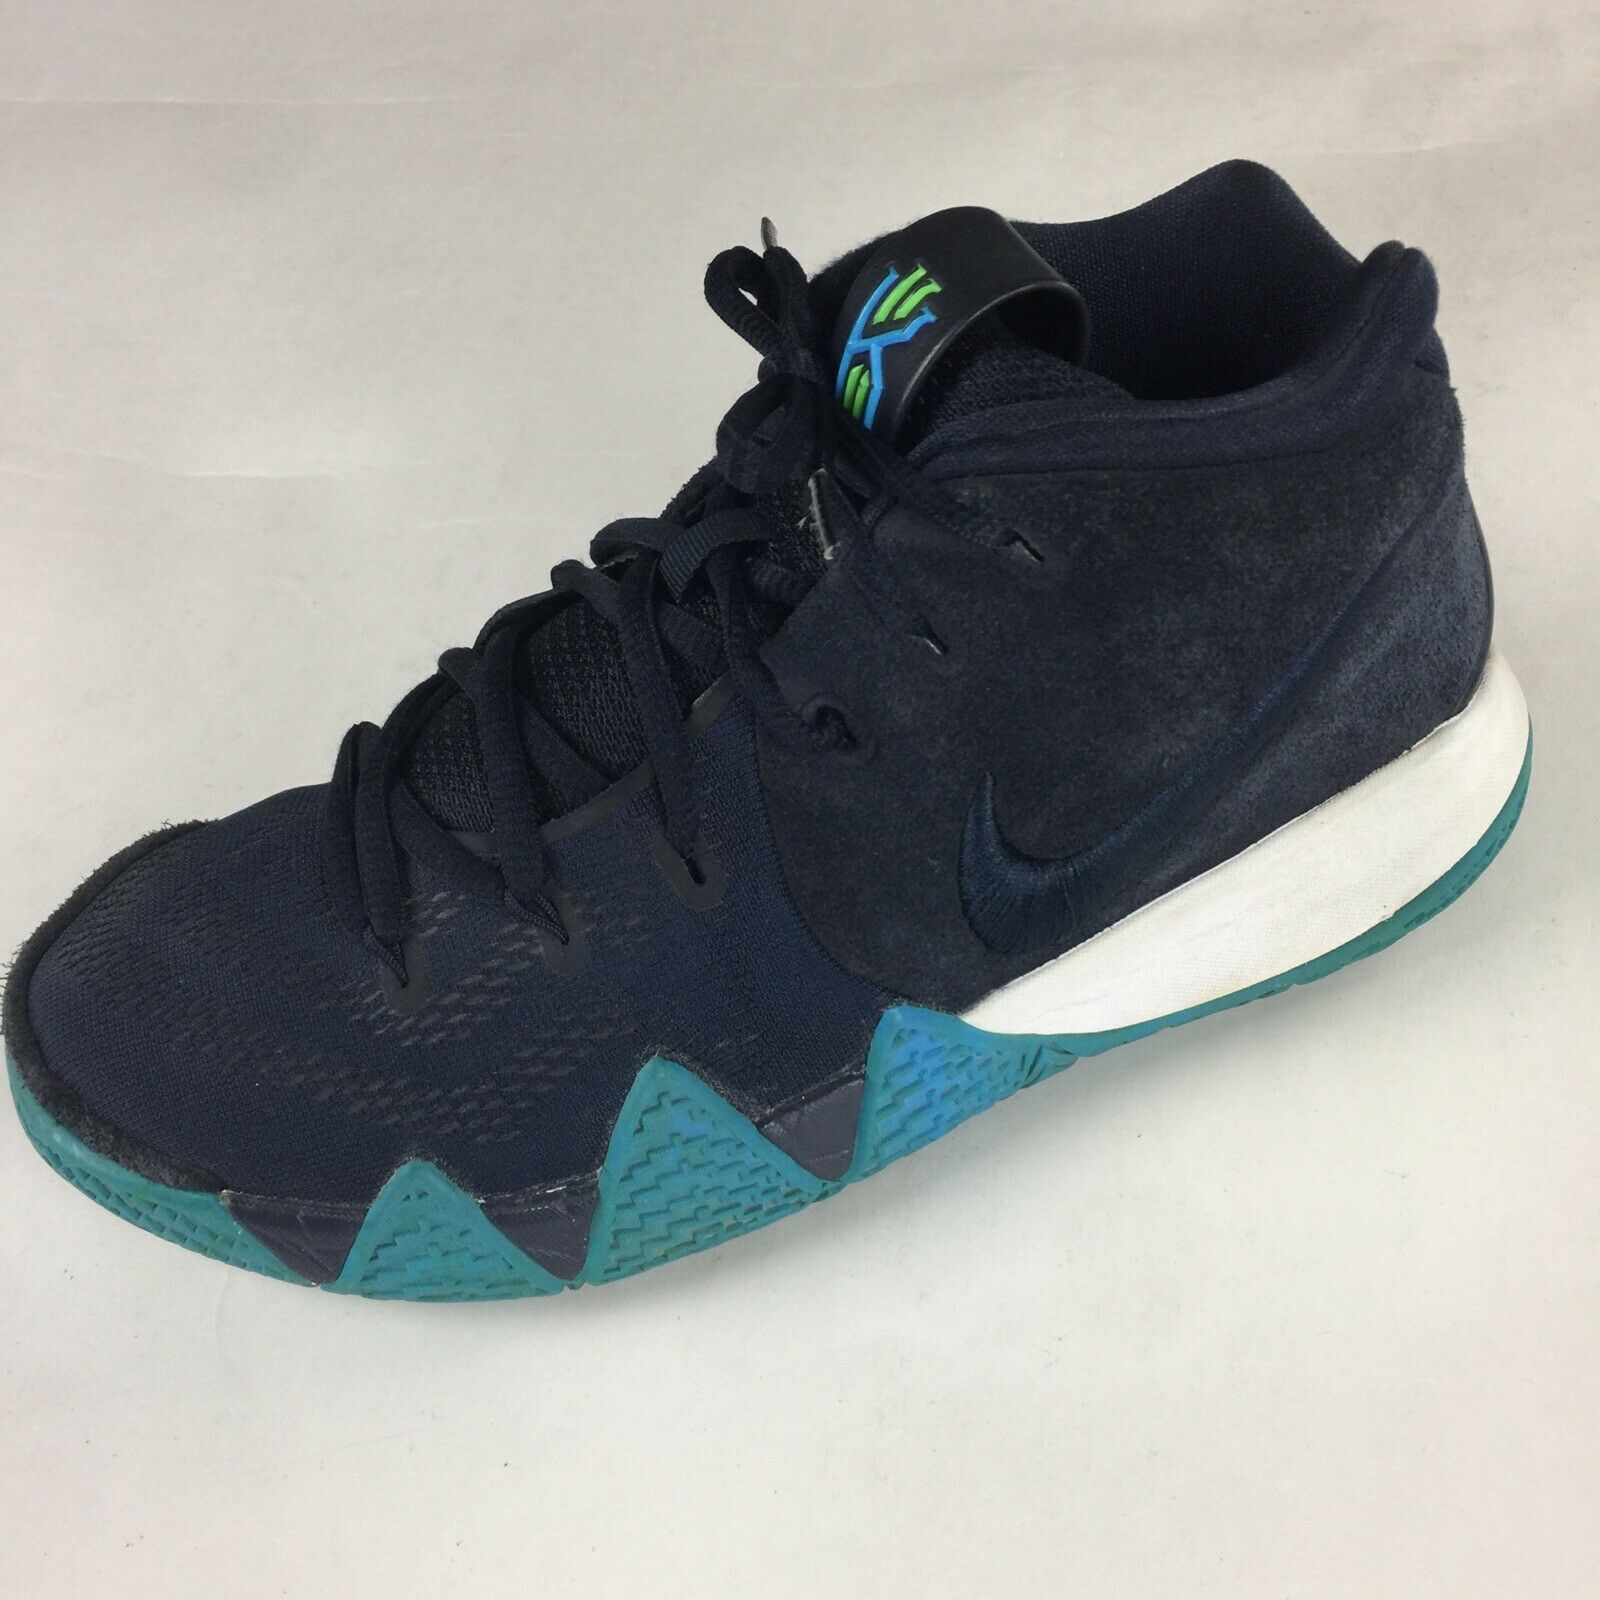 Nike Kyrie 4 GS Dark Obsidian Black Basketball Shoes AA2897-401 Youth Size 5.5Y